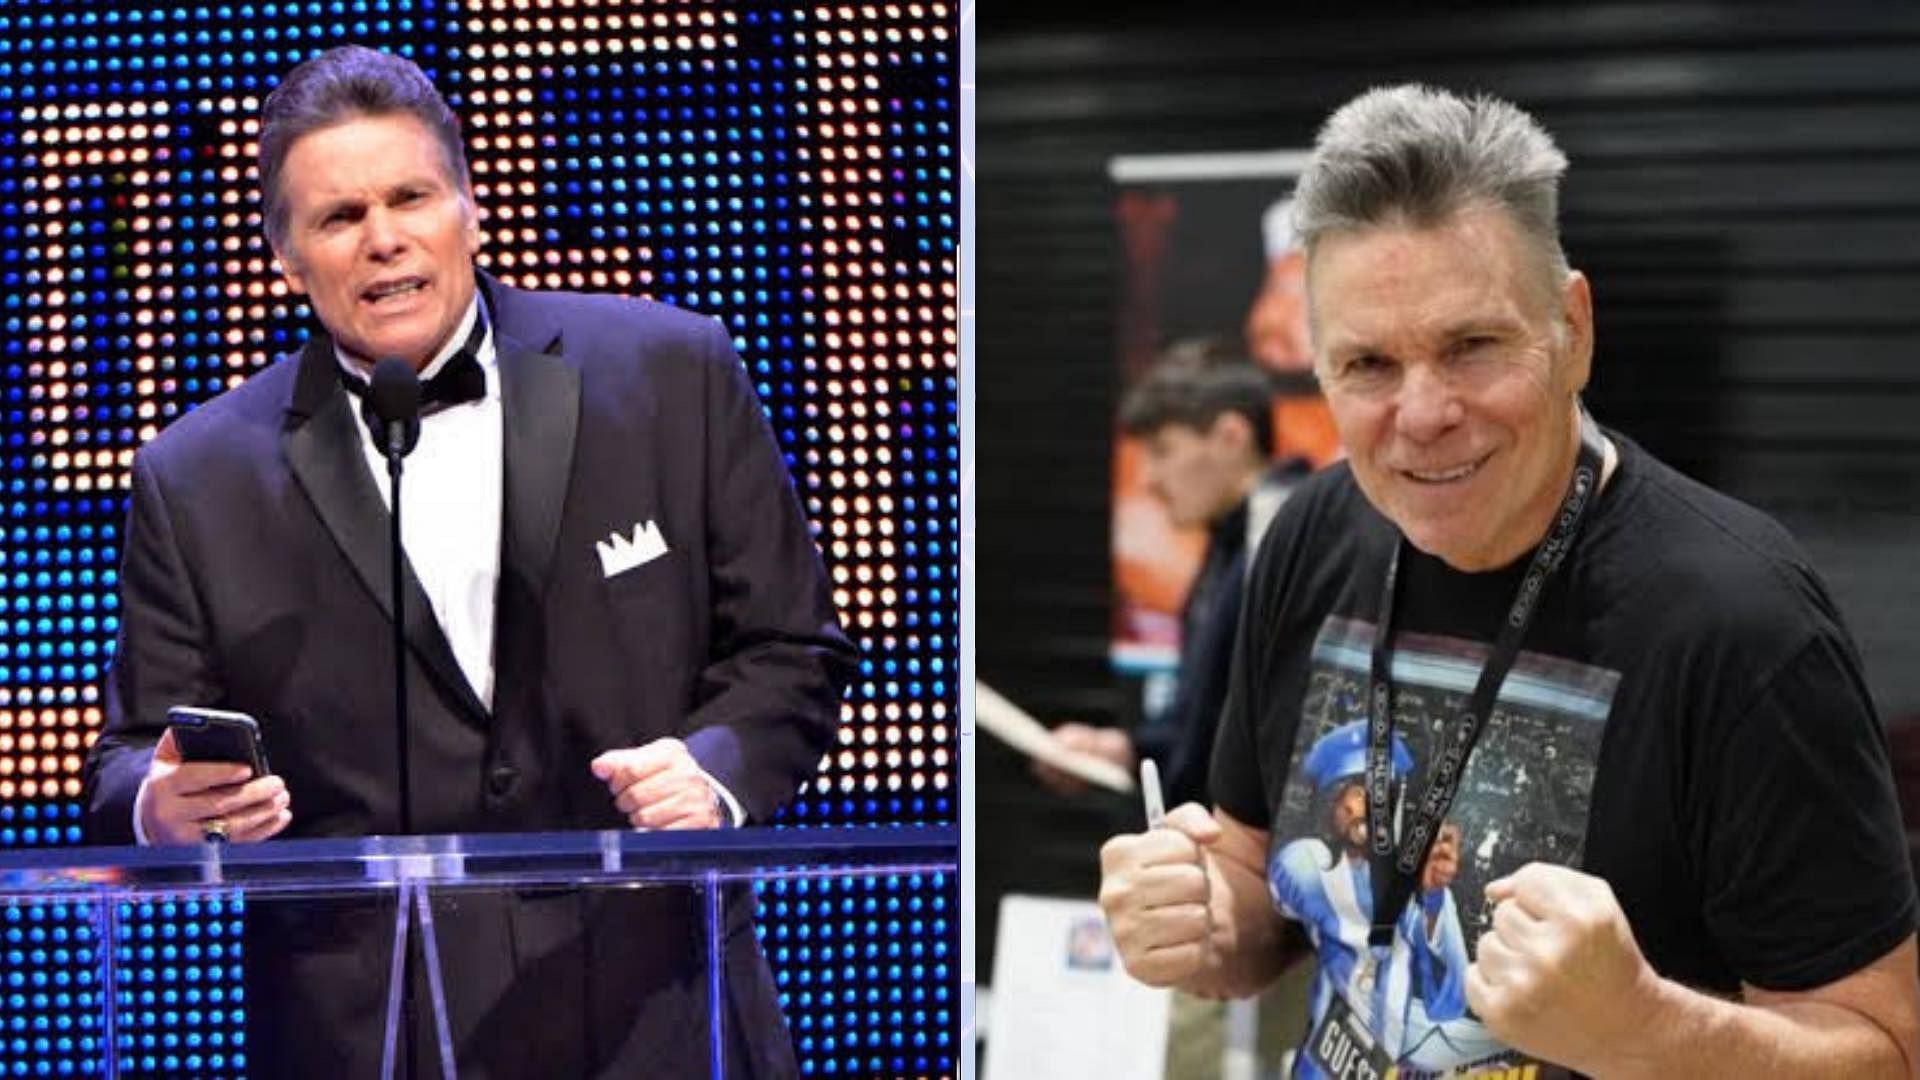 WWE legend Lanny Poffo passed away at 68.